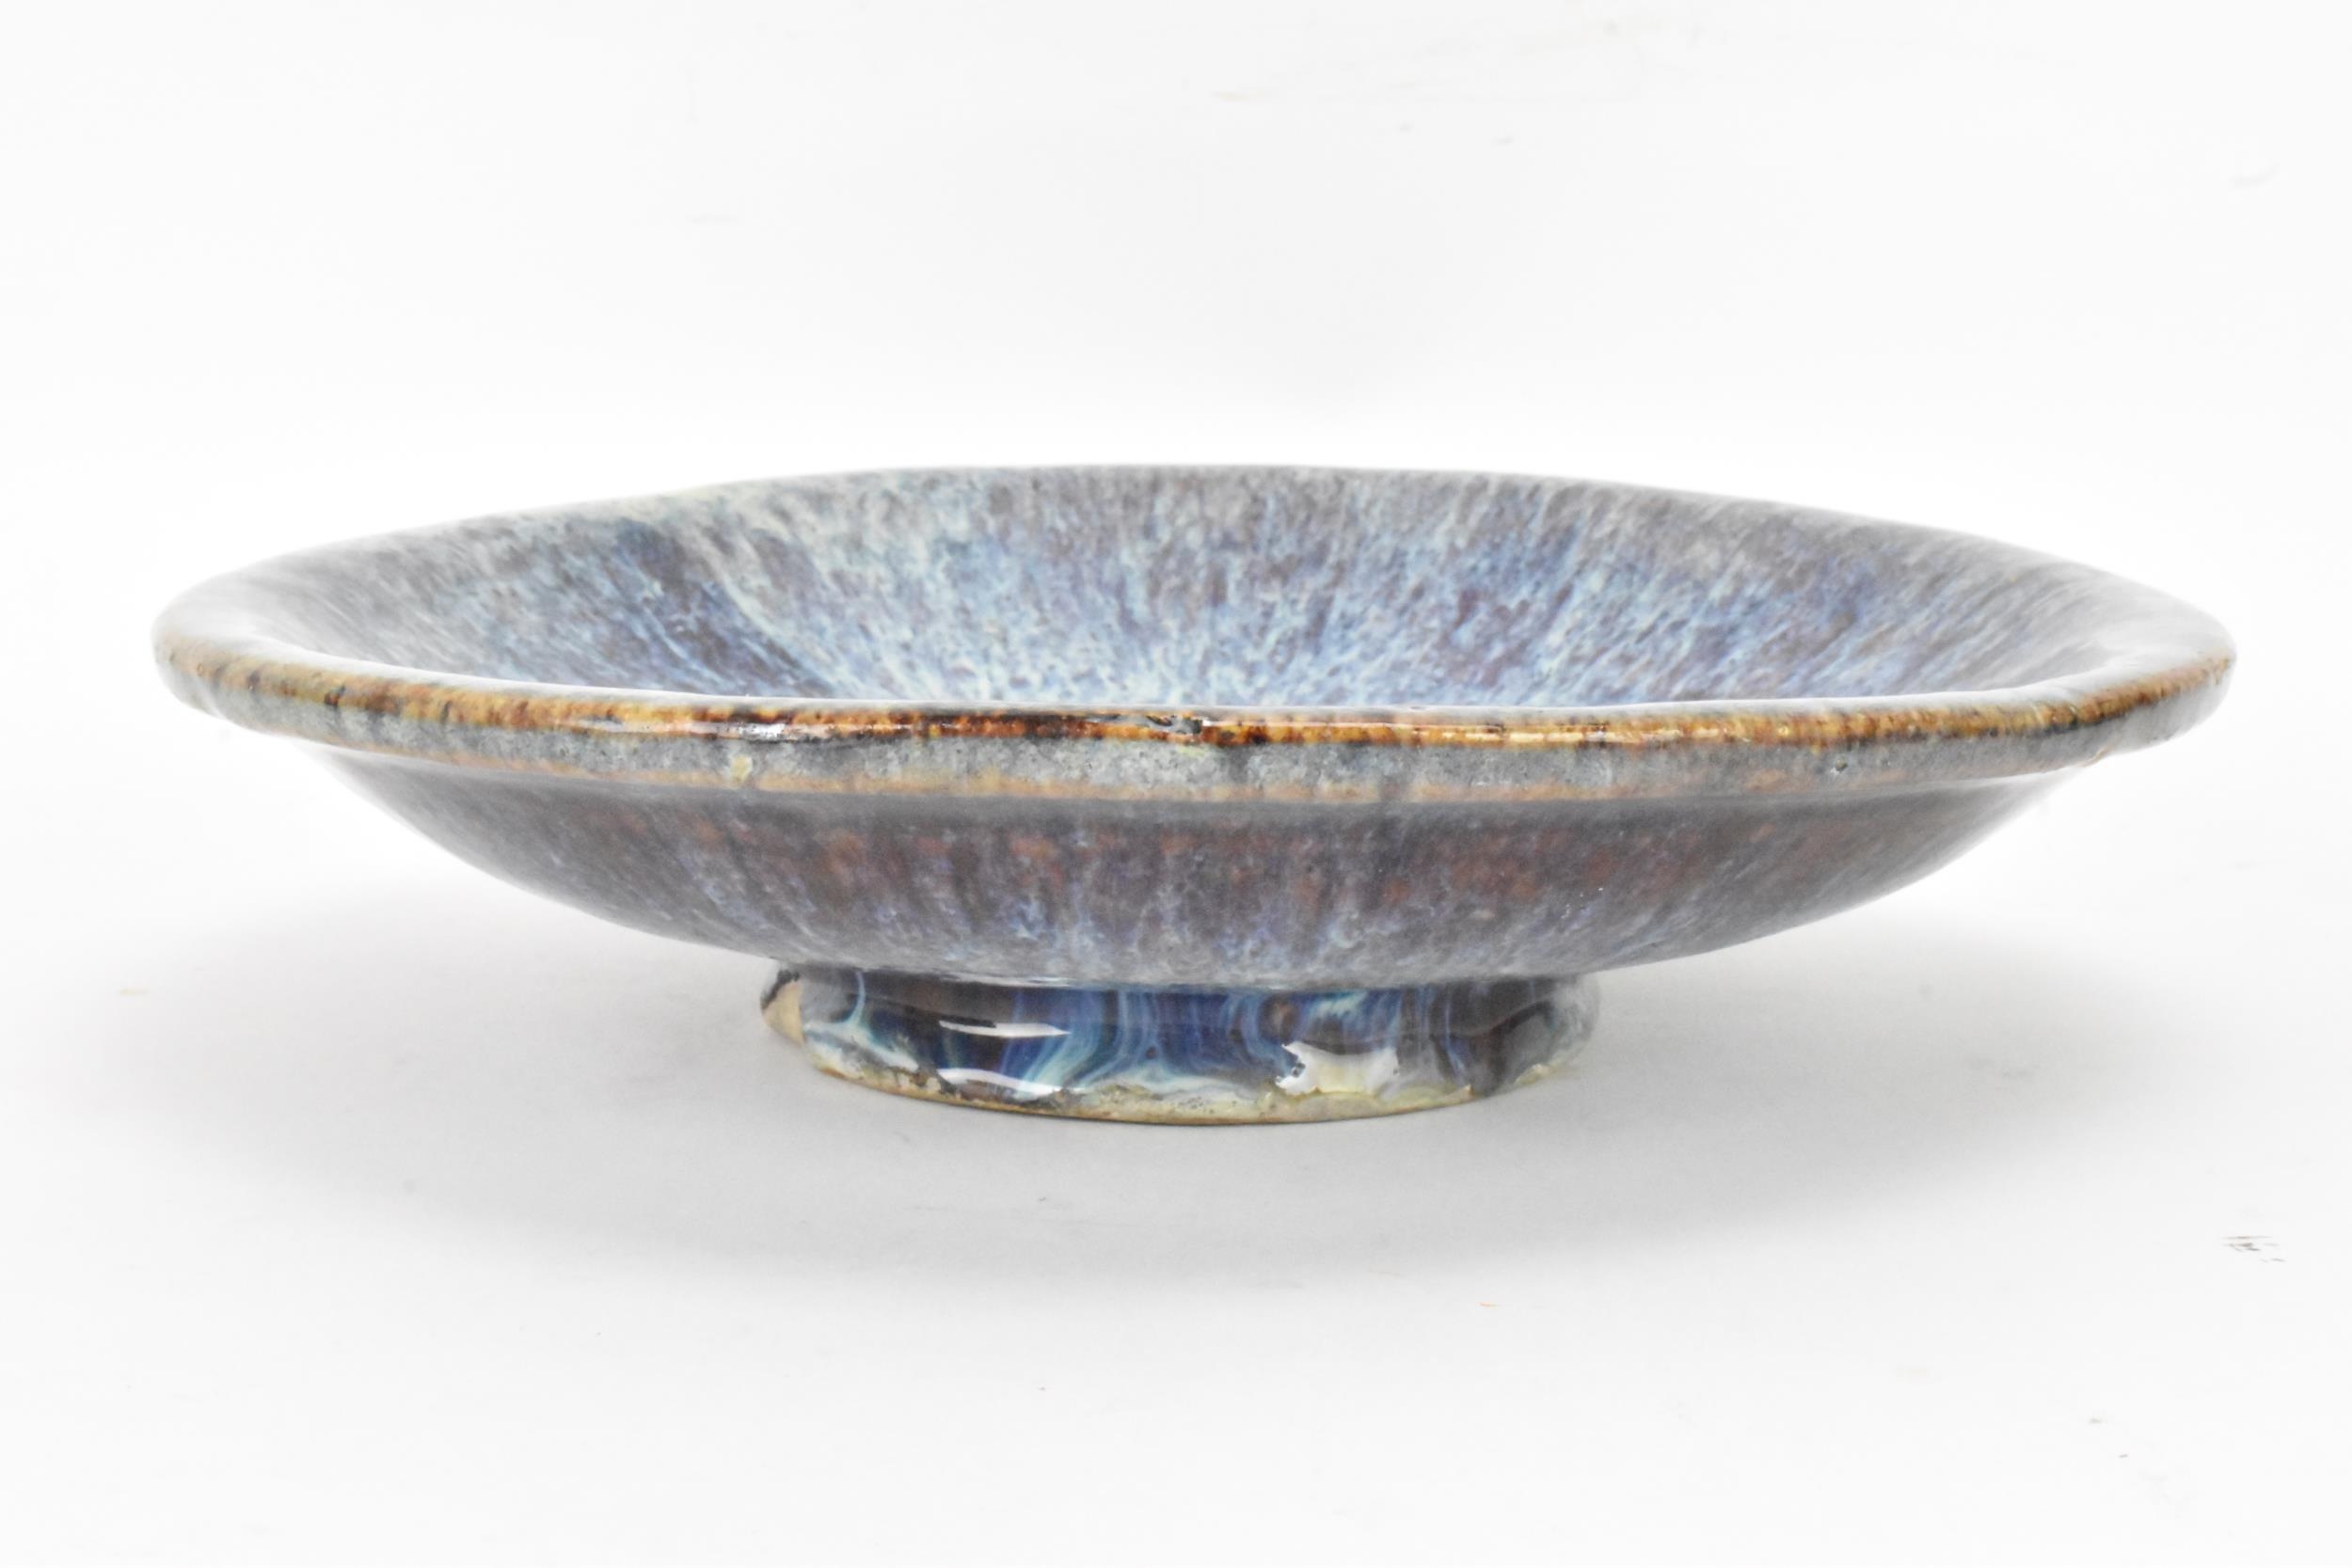 A Chinese Jun type bowl, possibly Shiwan ware, covered in a lustrous ochre turquoise and purple